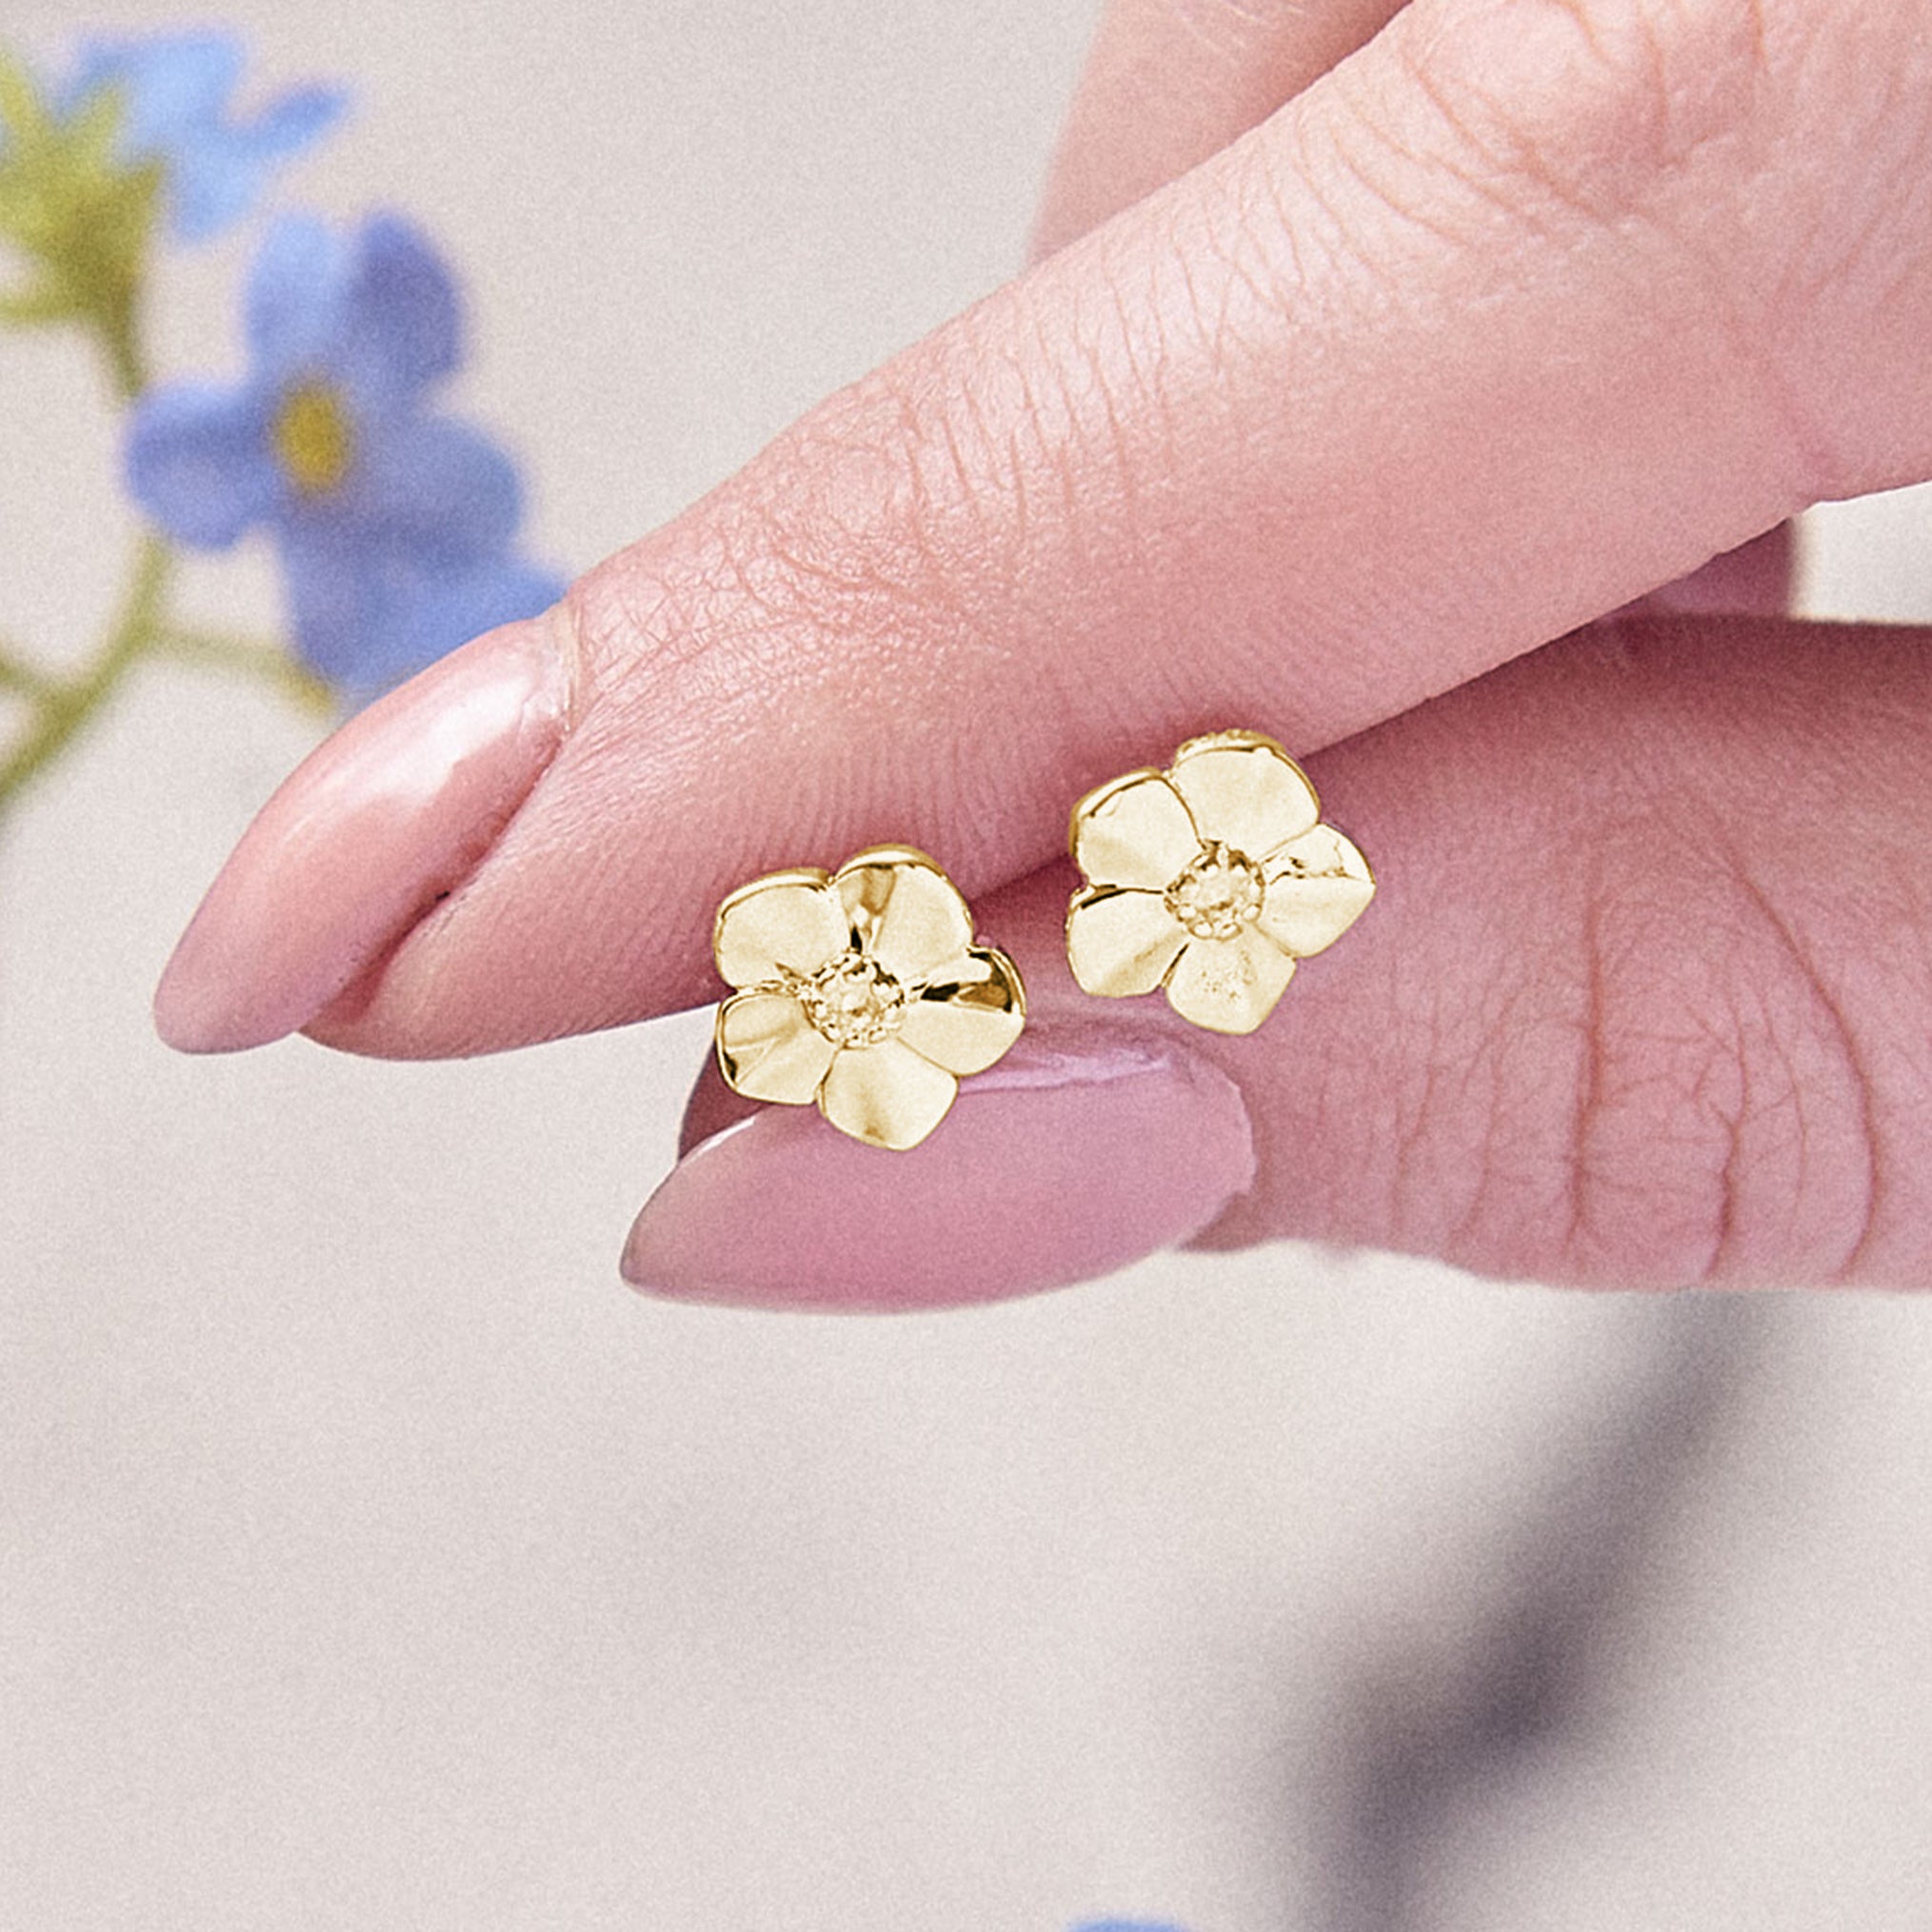 Forget-Me-Nots: The Meaning & Symbolism - Scarlett Jewellery